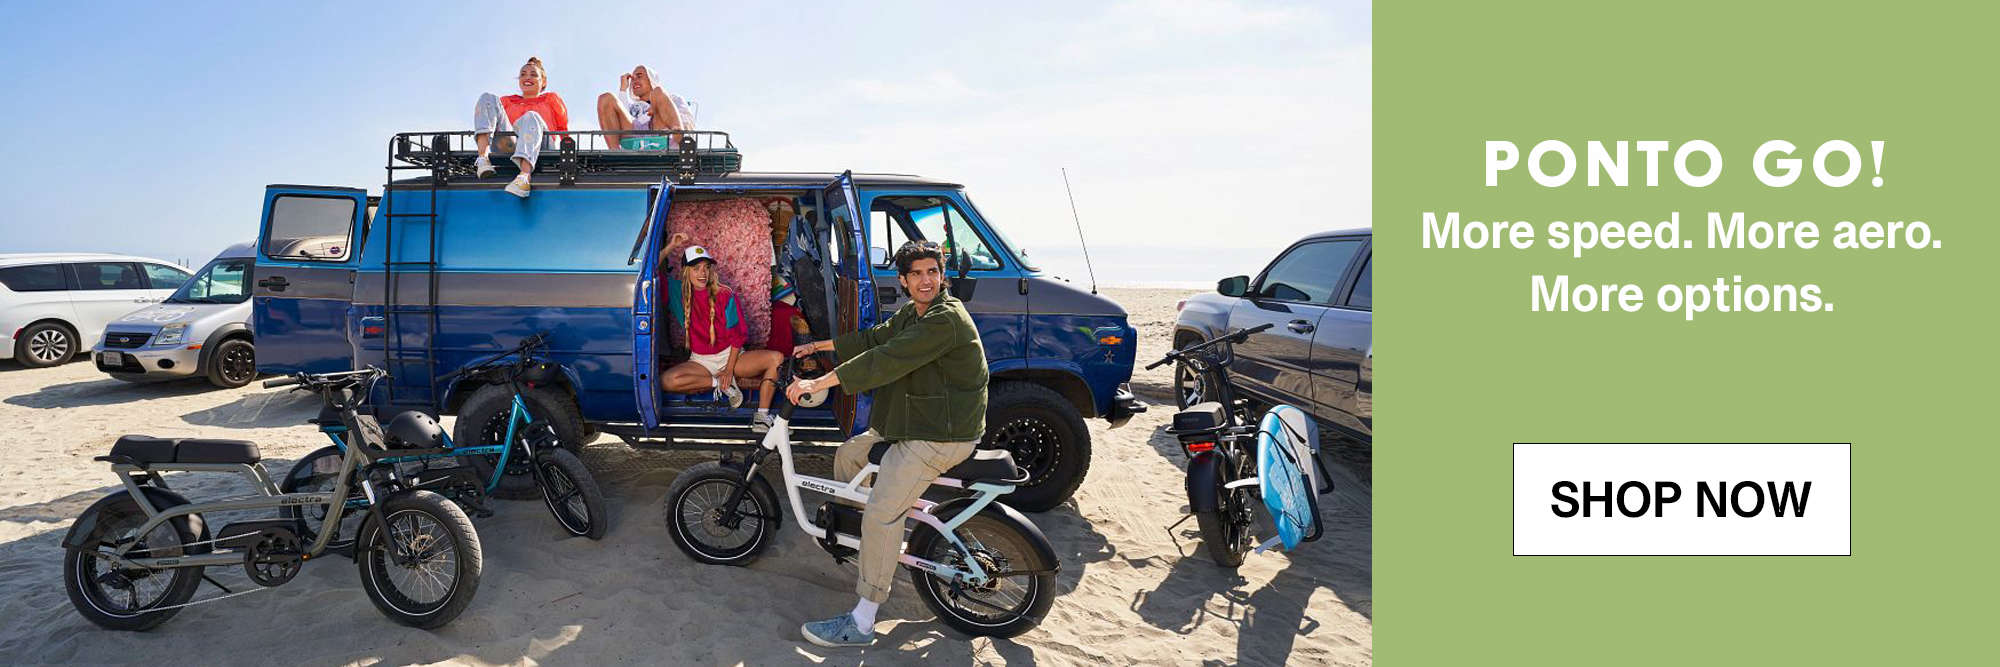 Electra Ponto Go bicycles with people hanging arounf at the beach